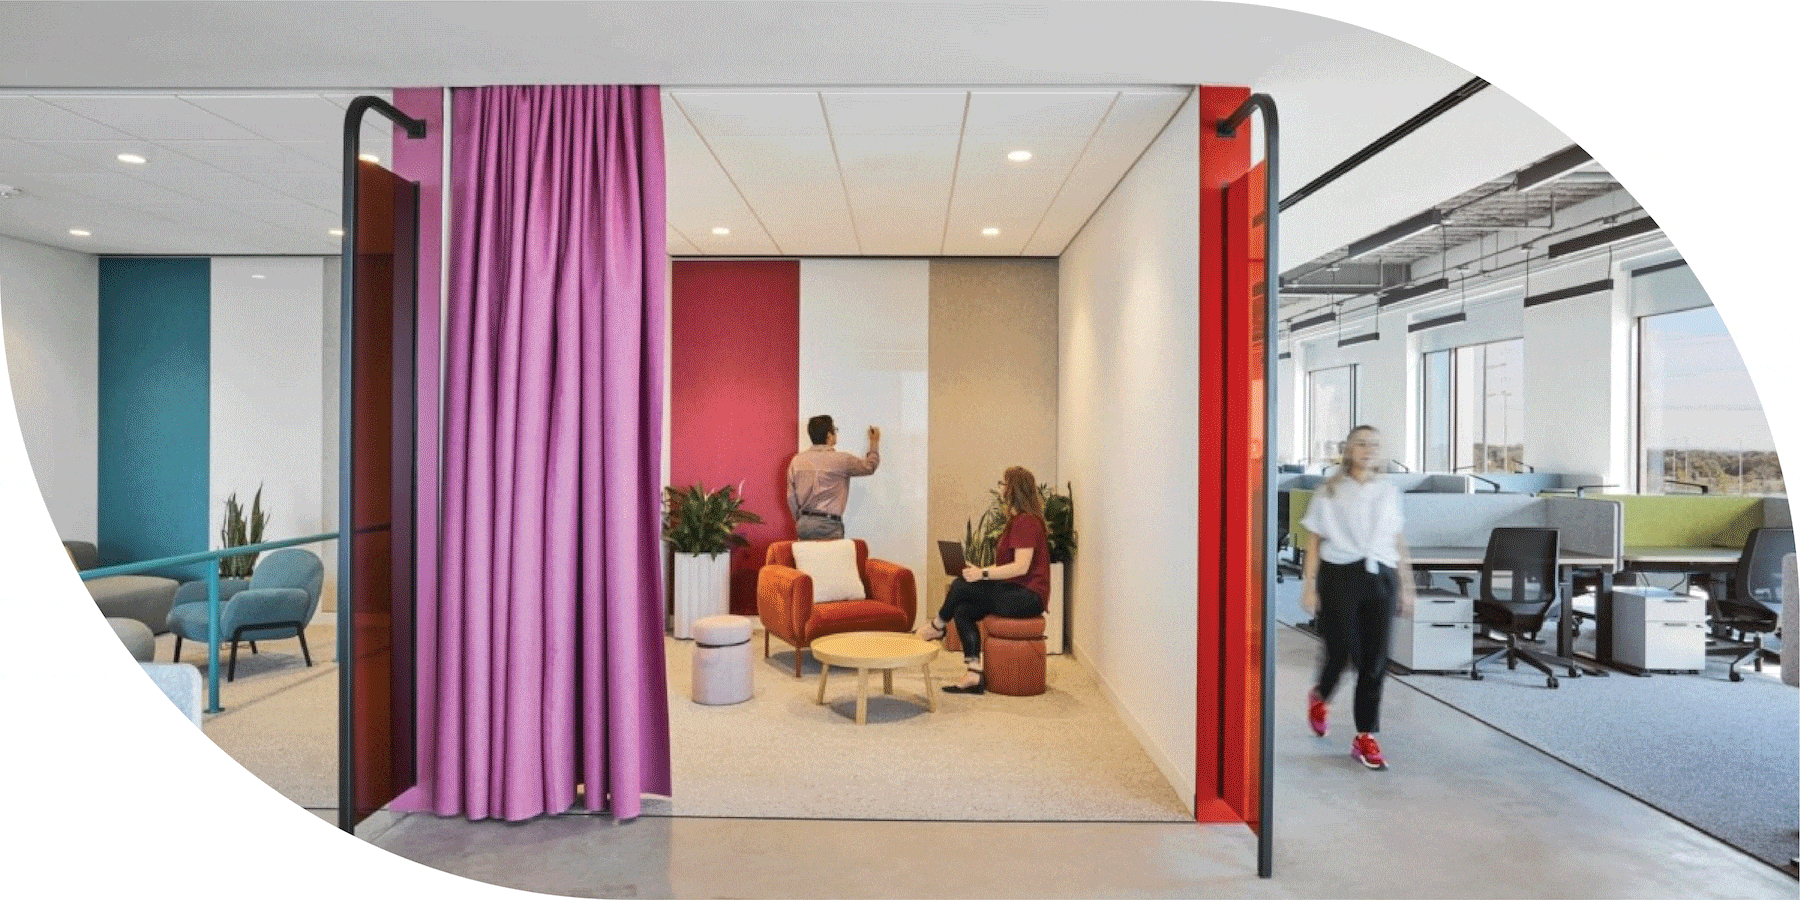 New, colorful offices with ceiling curtains, products on casters and movable walls